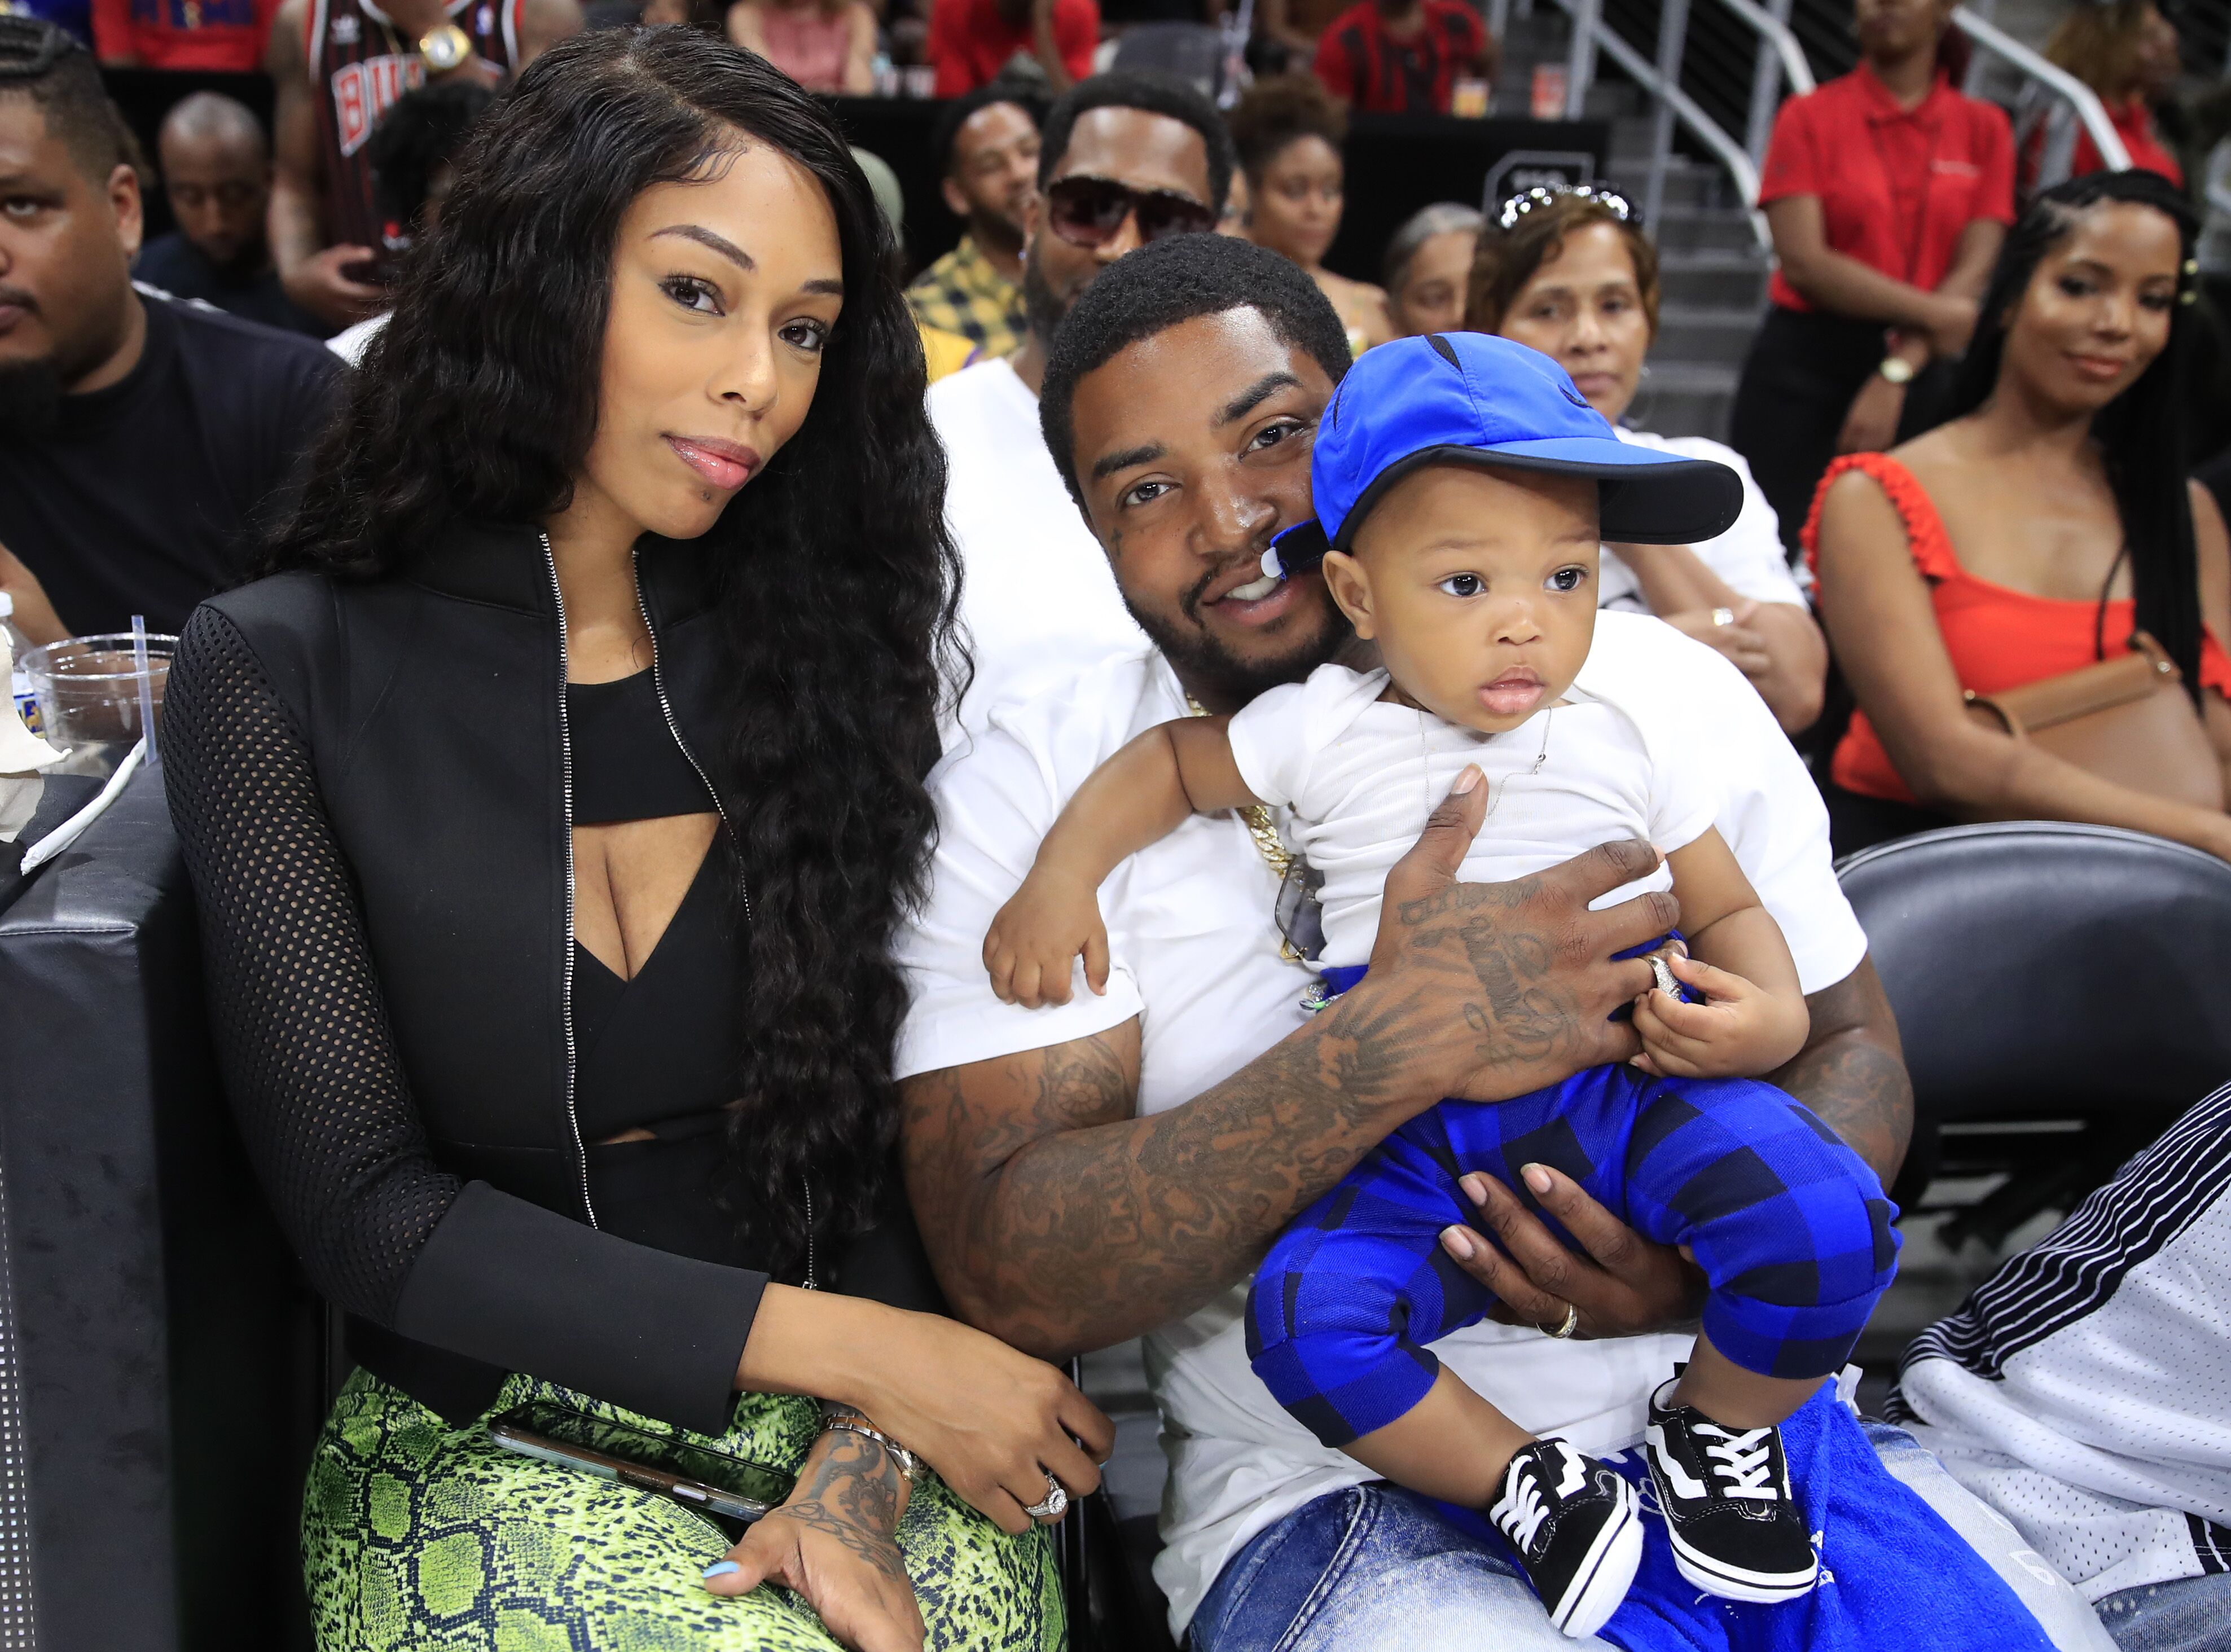 Lil Scrappy and Bambi Benson at an NBA game with their son, Prince Breland | Photo: Getty Images